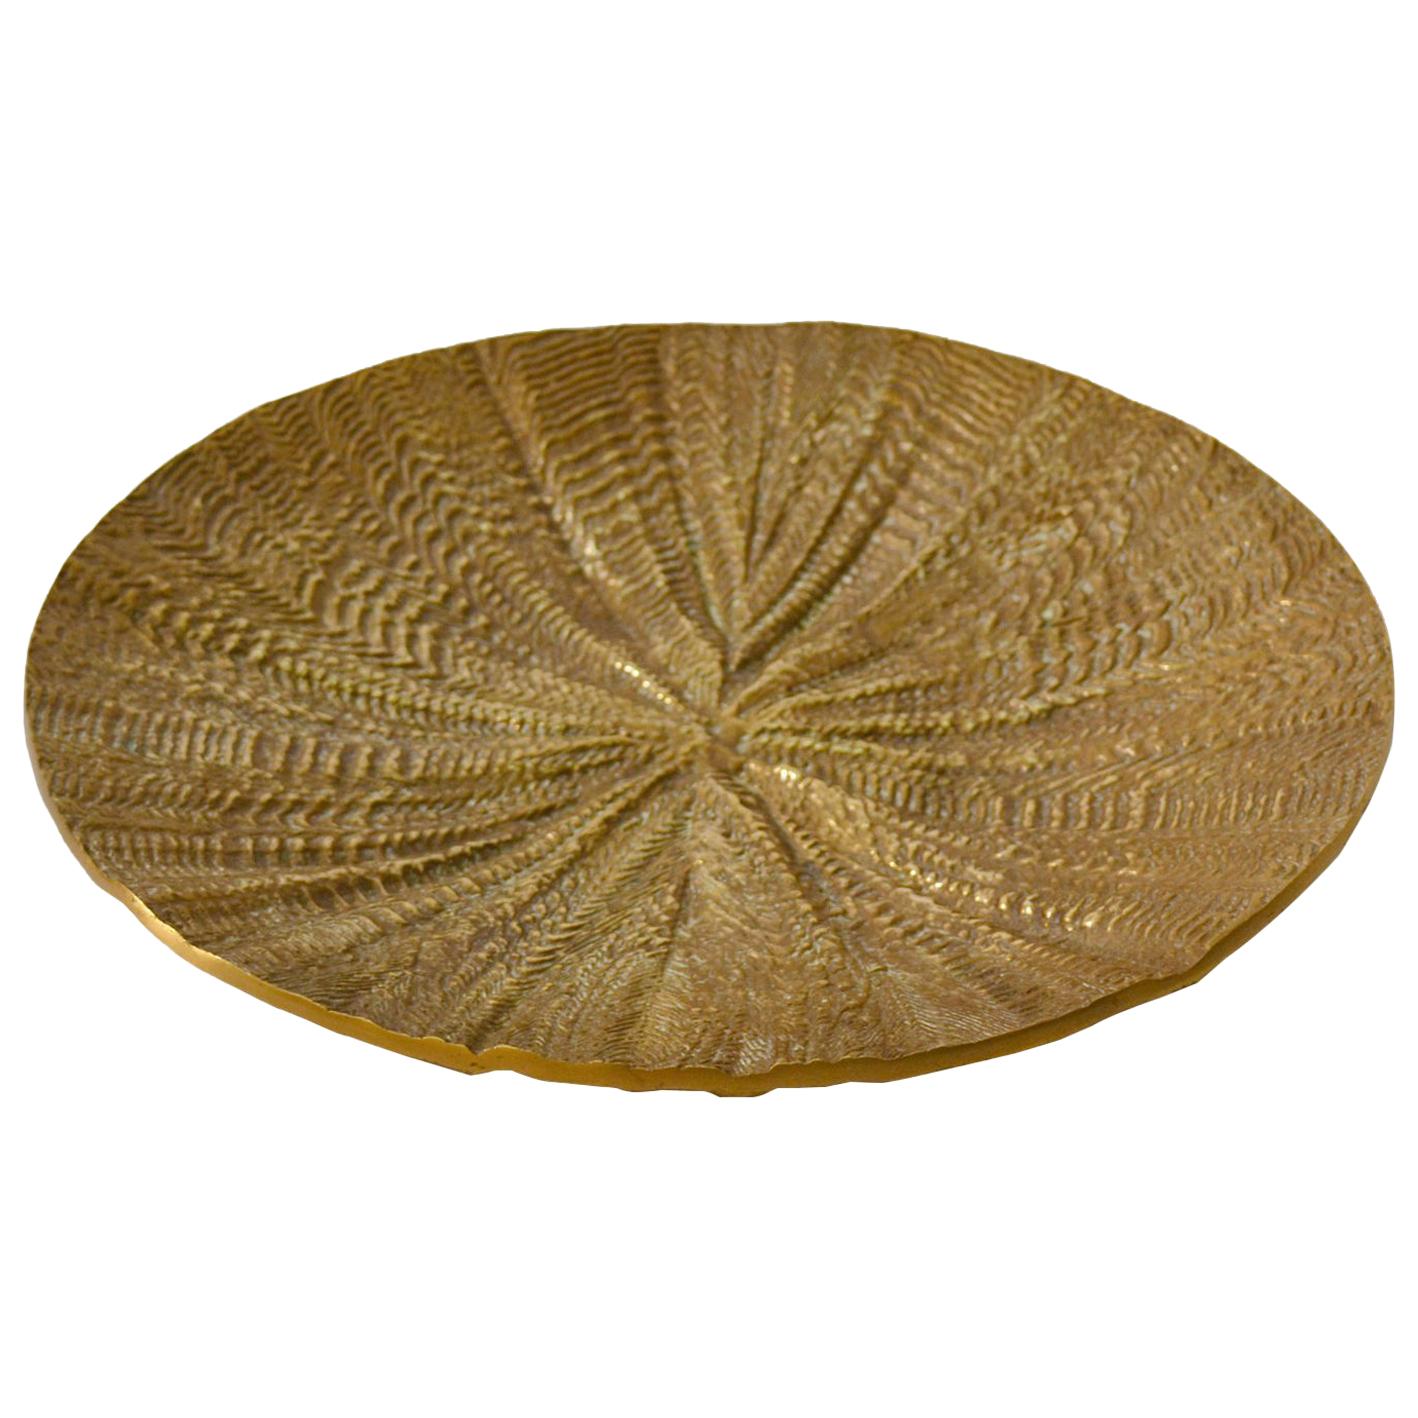 1970s Round Relief Dish or Bowl Cast in Bronze 